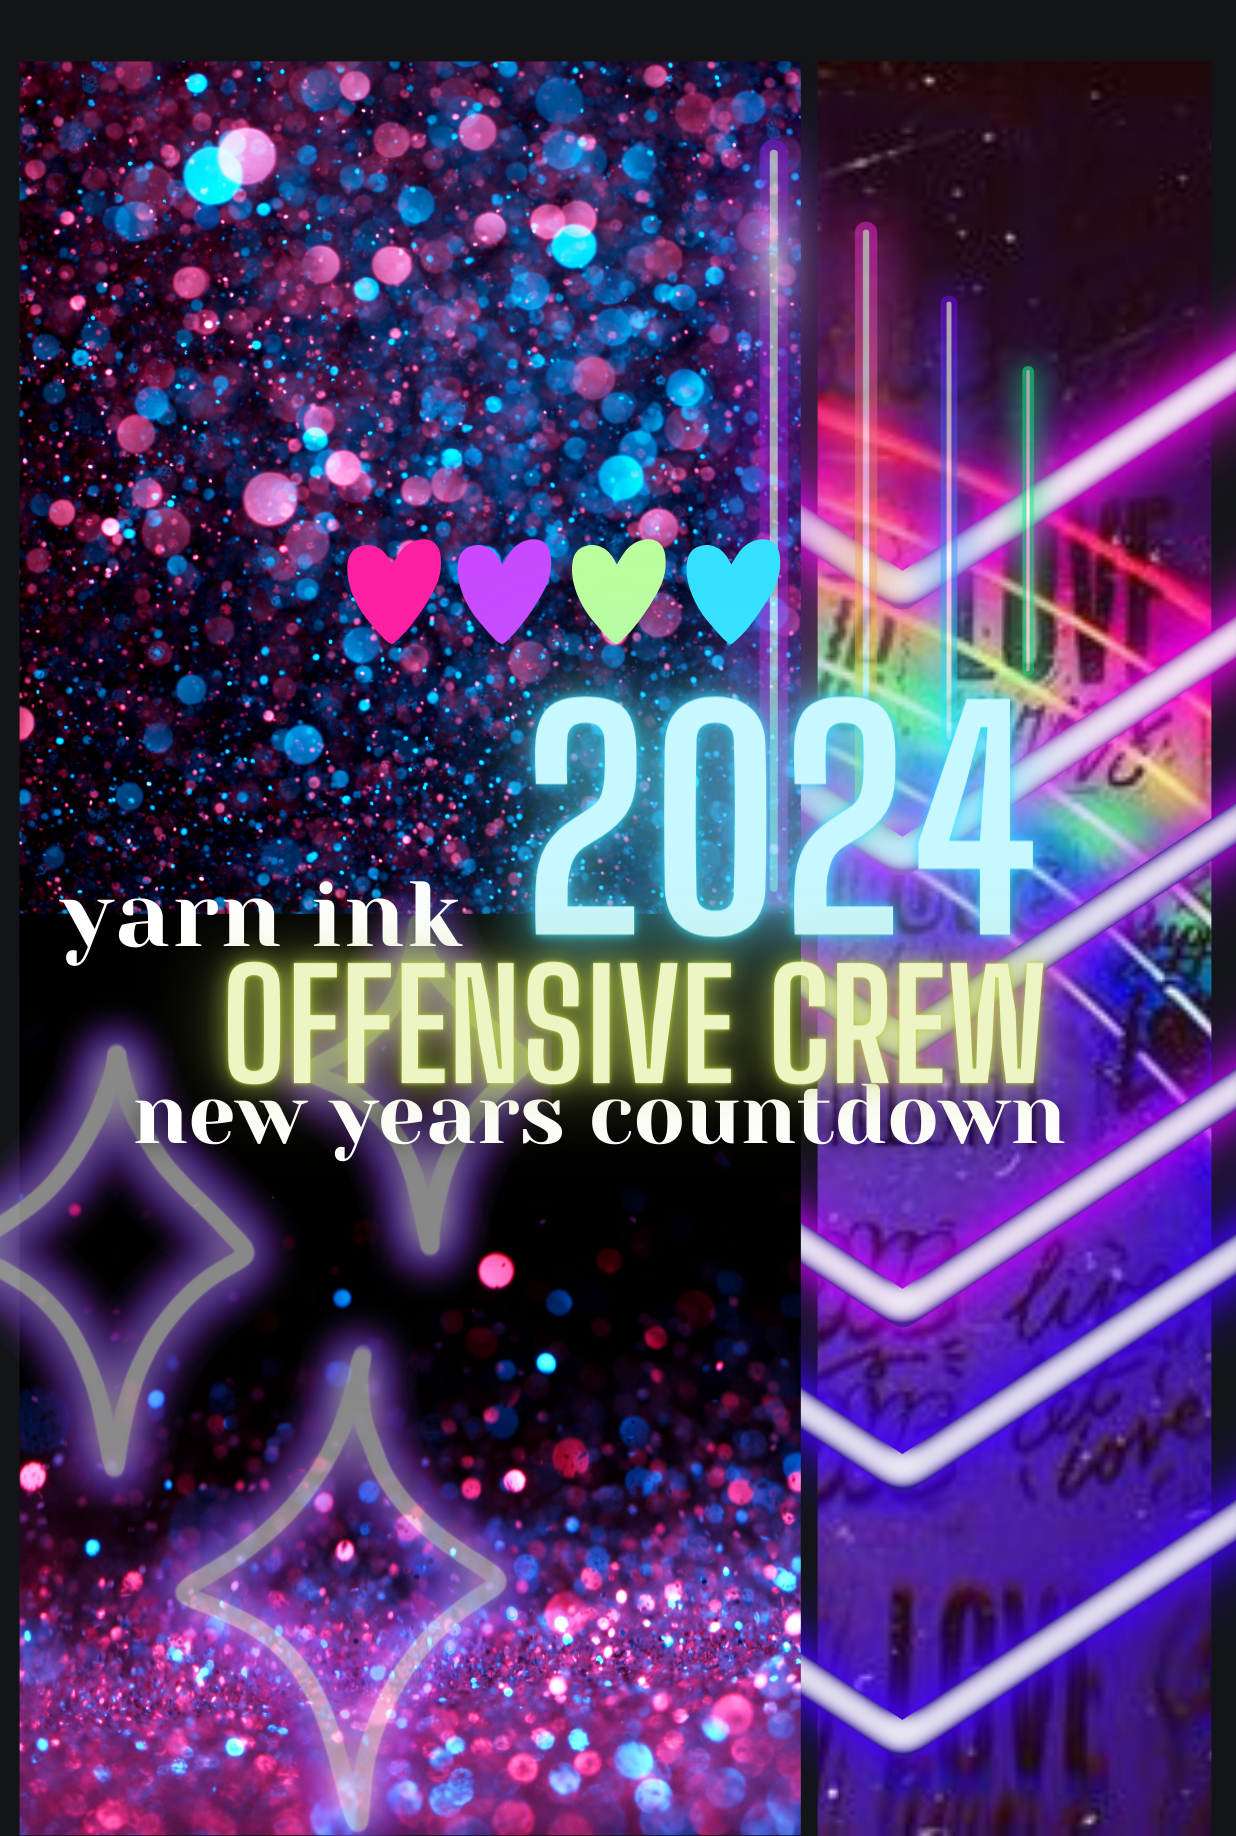 2024 offensive crew New Years countdown